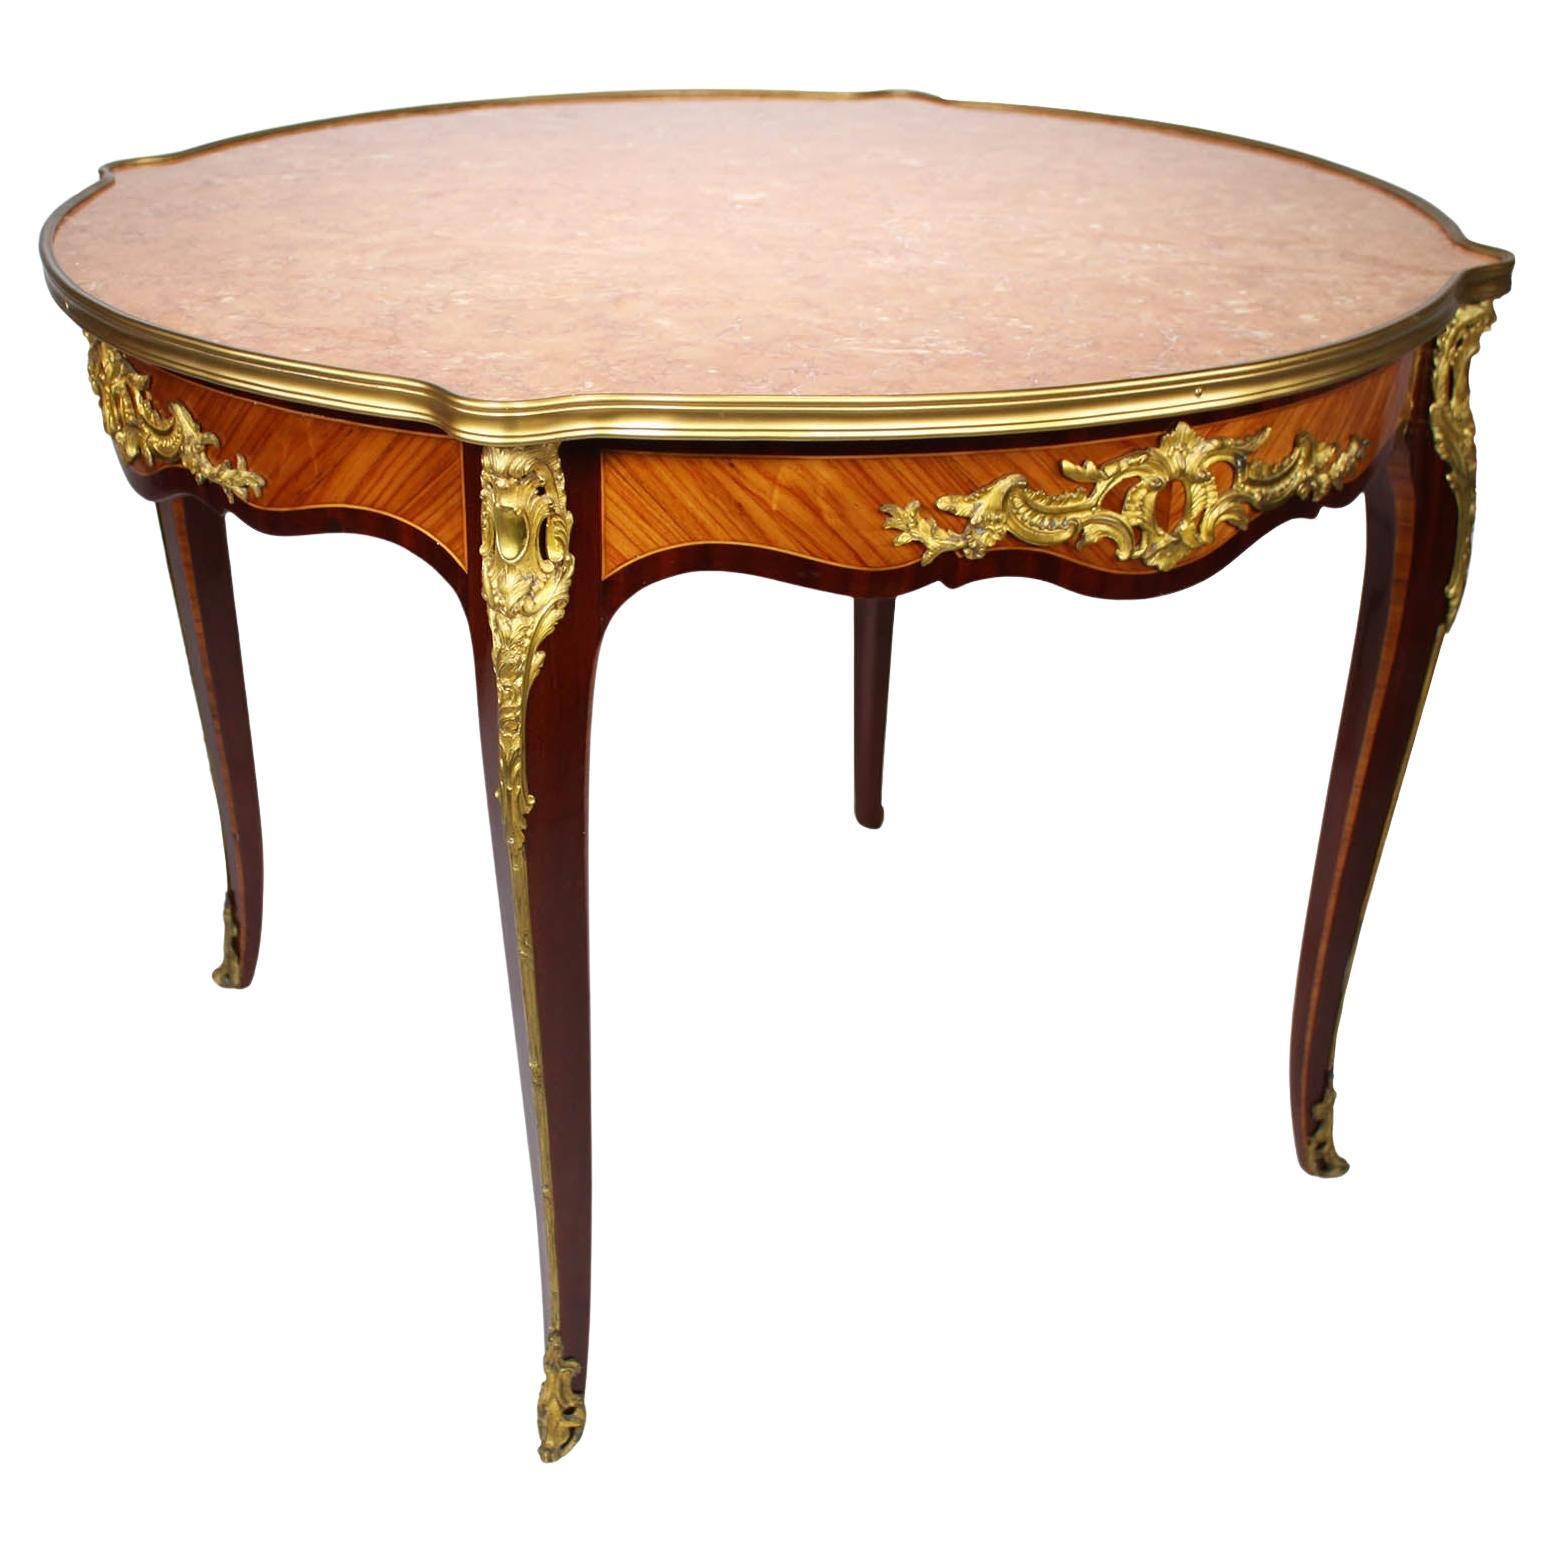 A French Louis XV Style Ormolu Mounted Side or Center Table, Attr. Maison Jansen